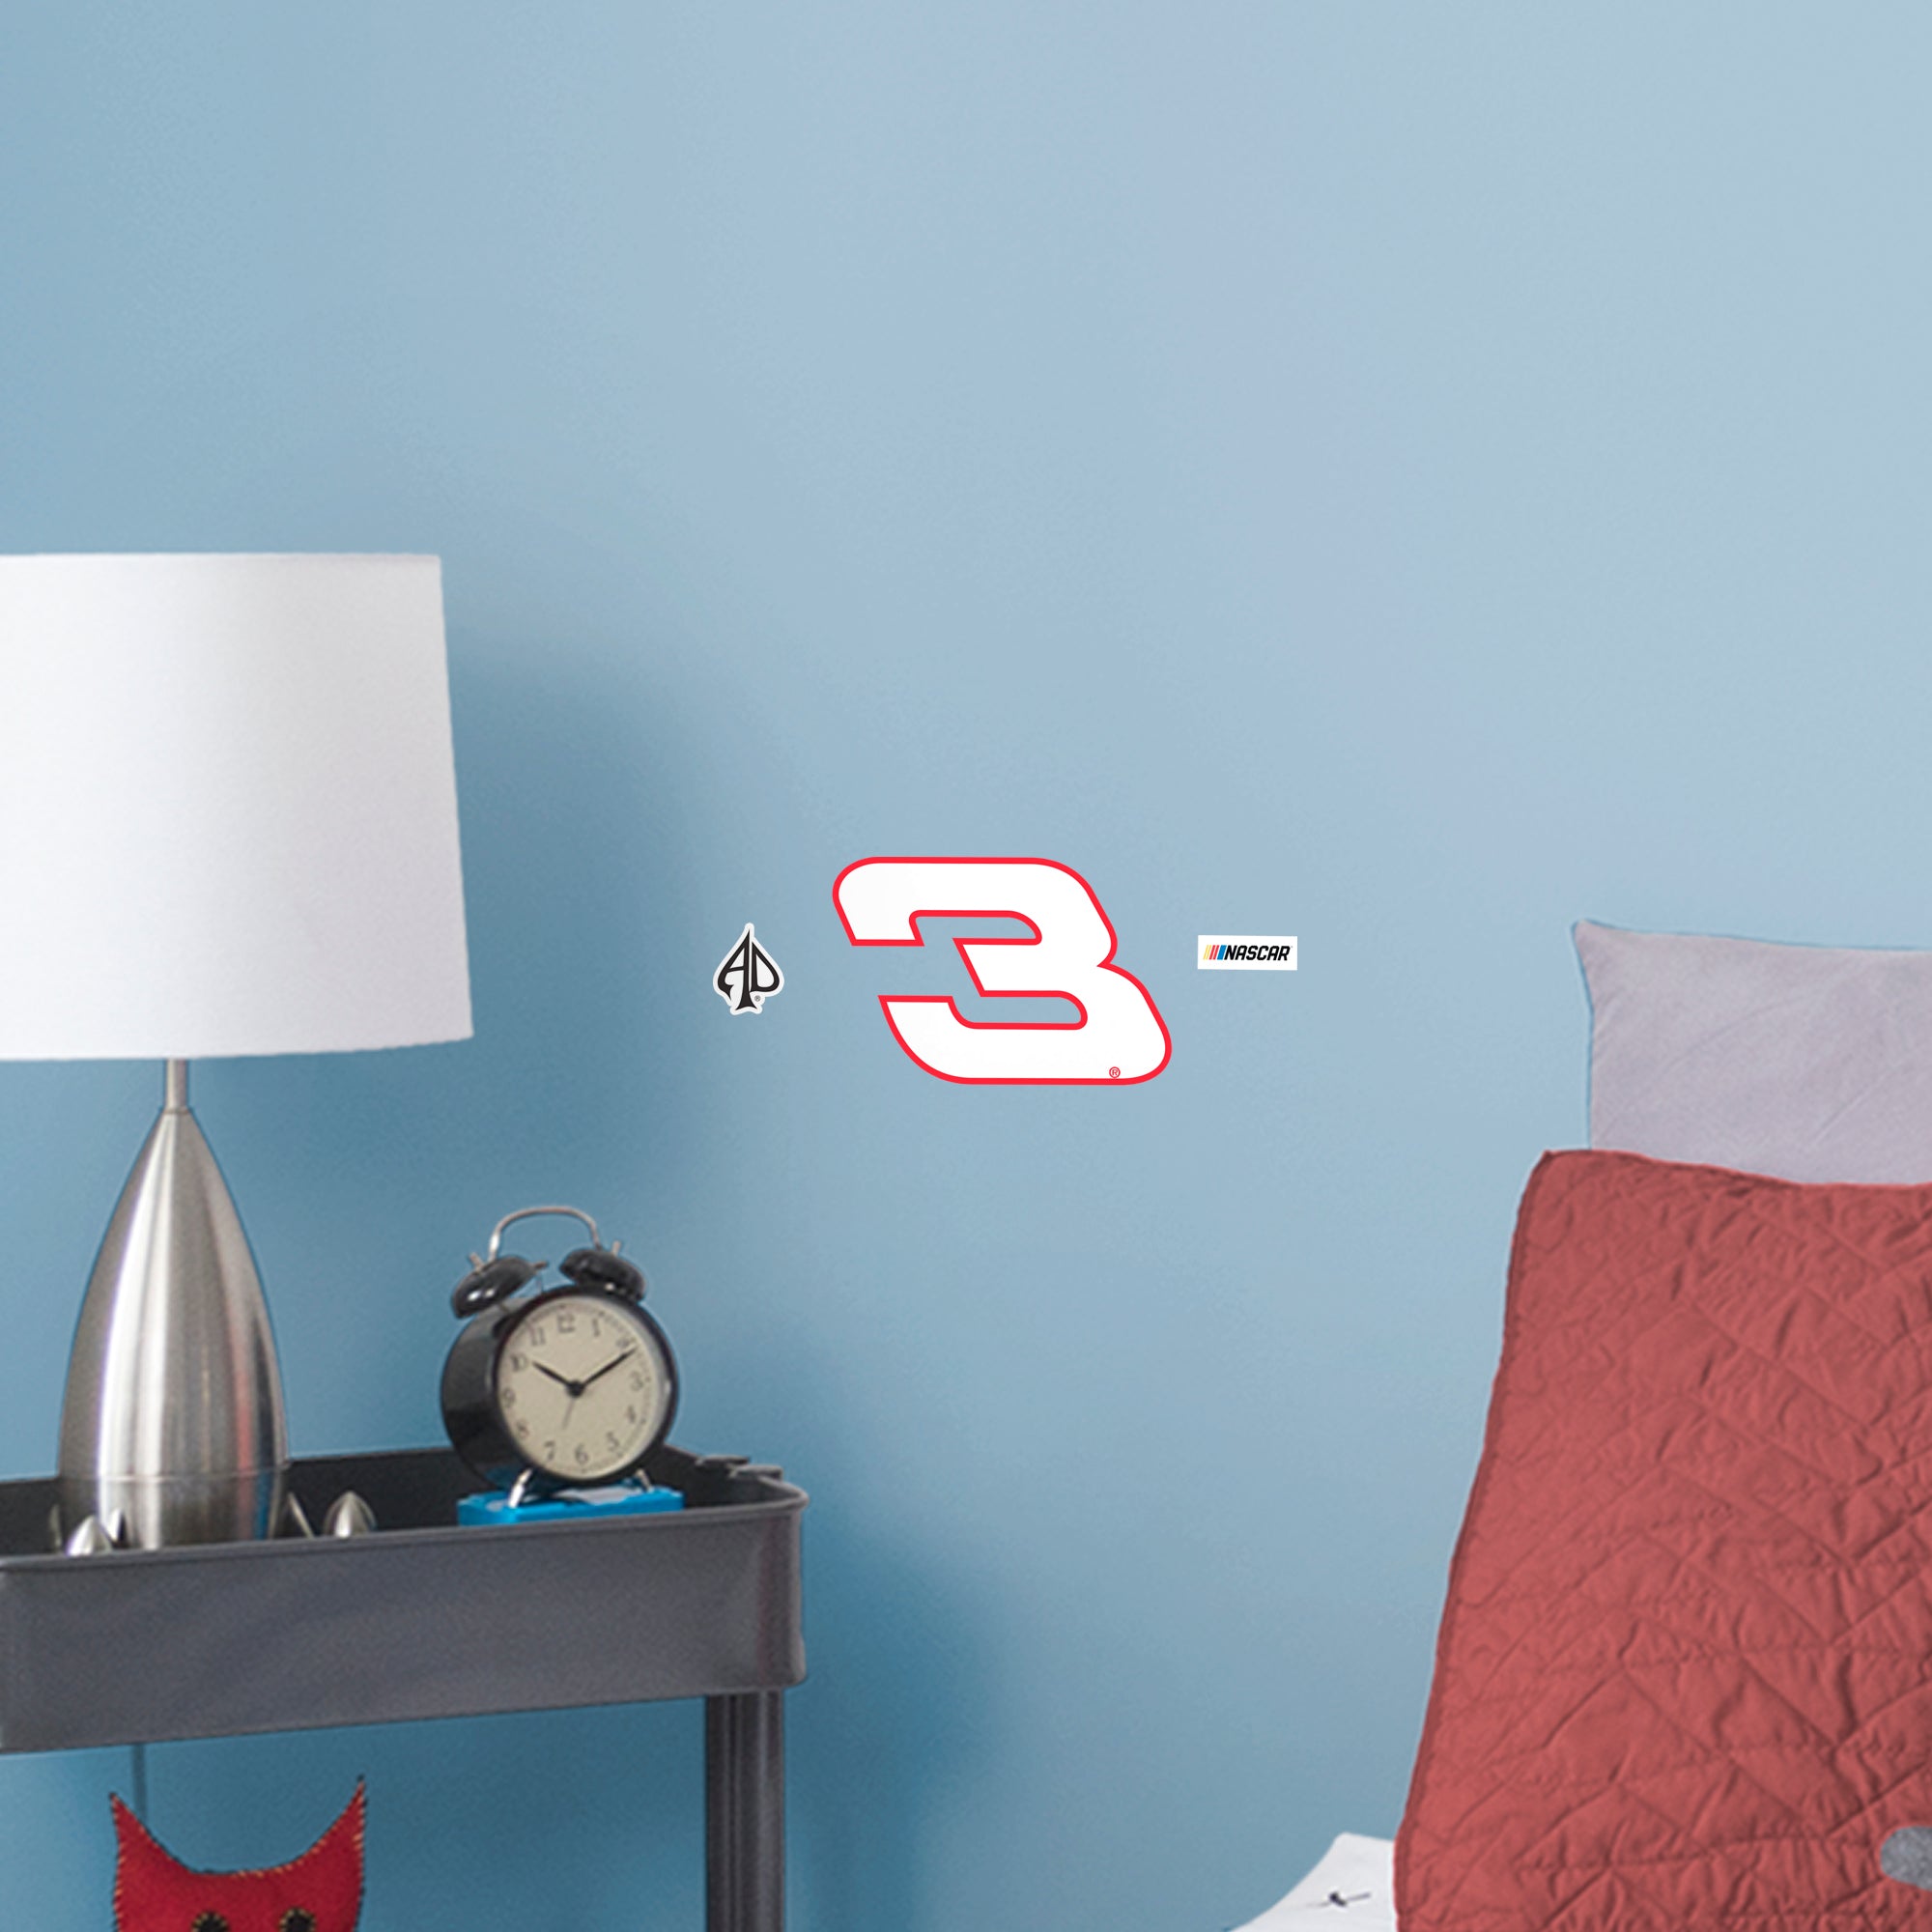 Austin Dillon 2021 #3 Logo - Officially Licensed NASCAR Removable Wall Decal Large by Fathead | Vinyl